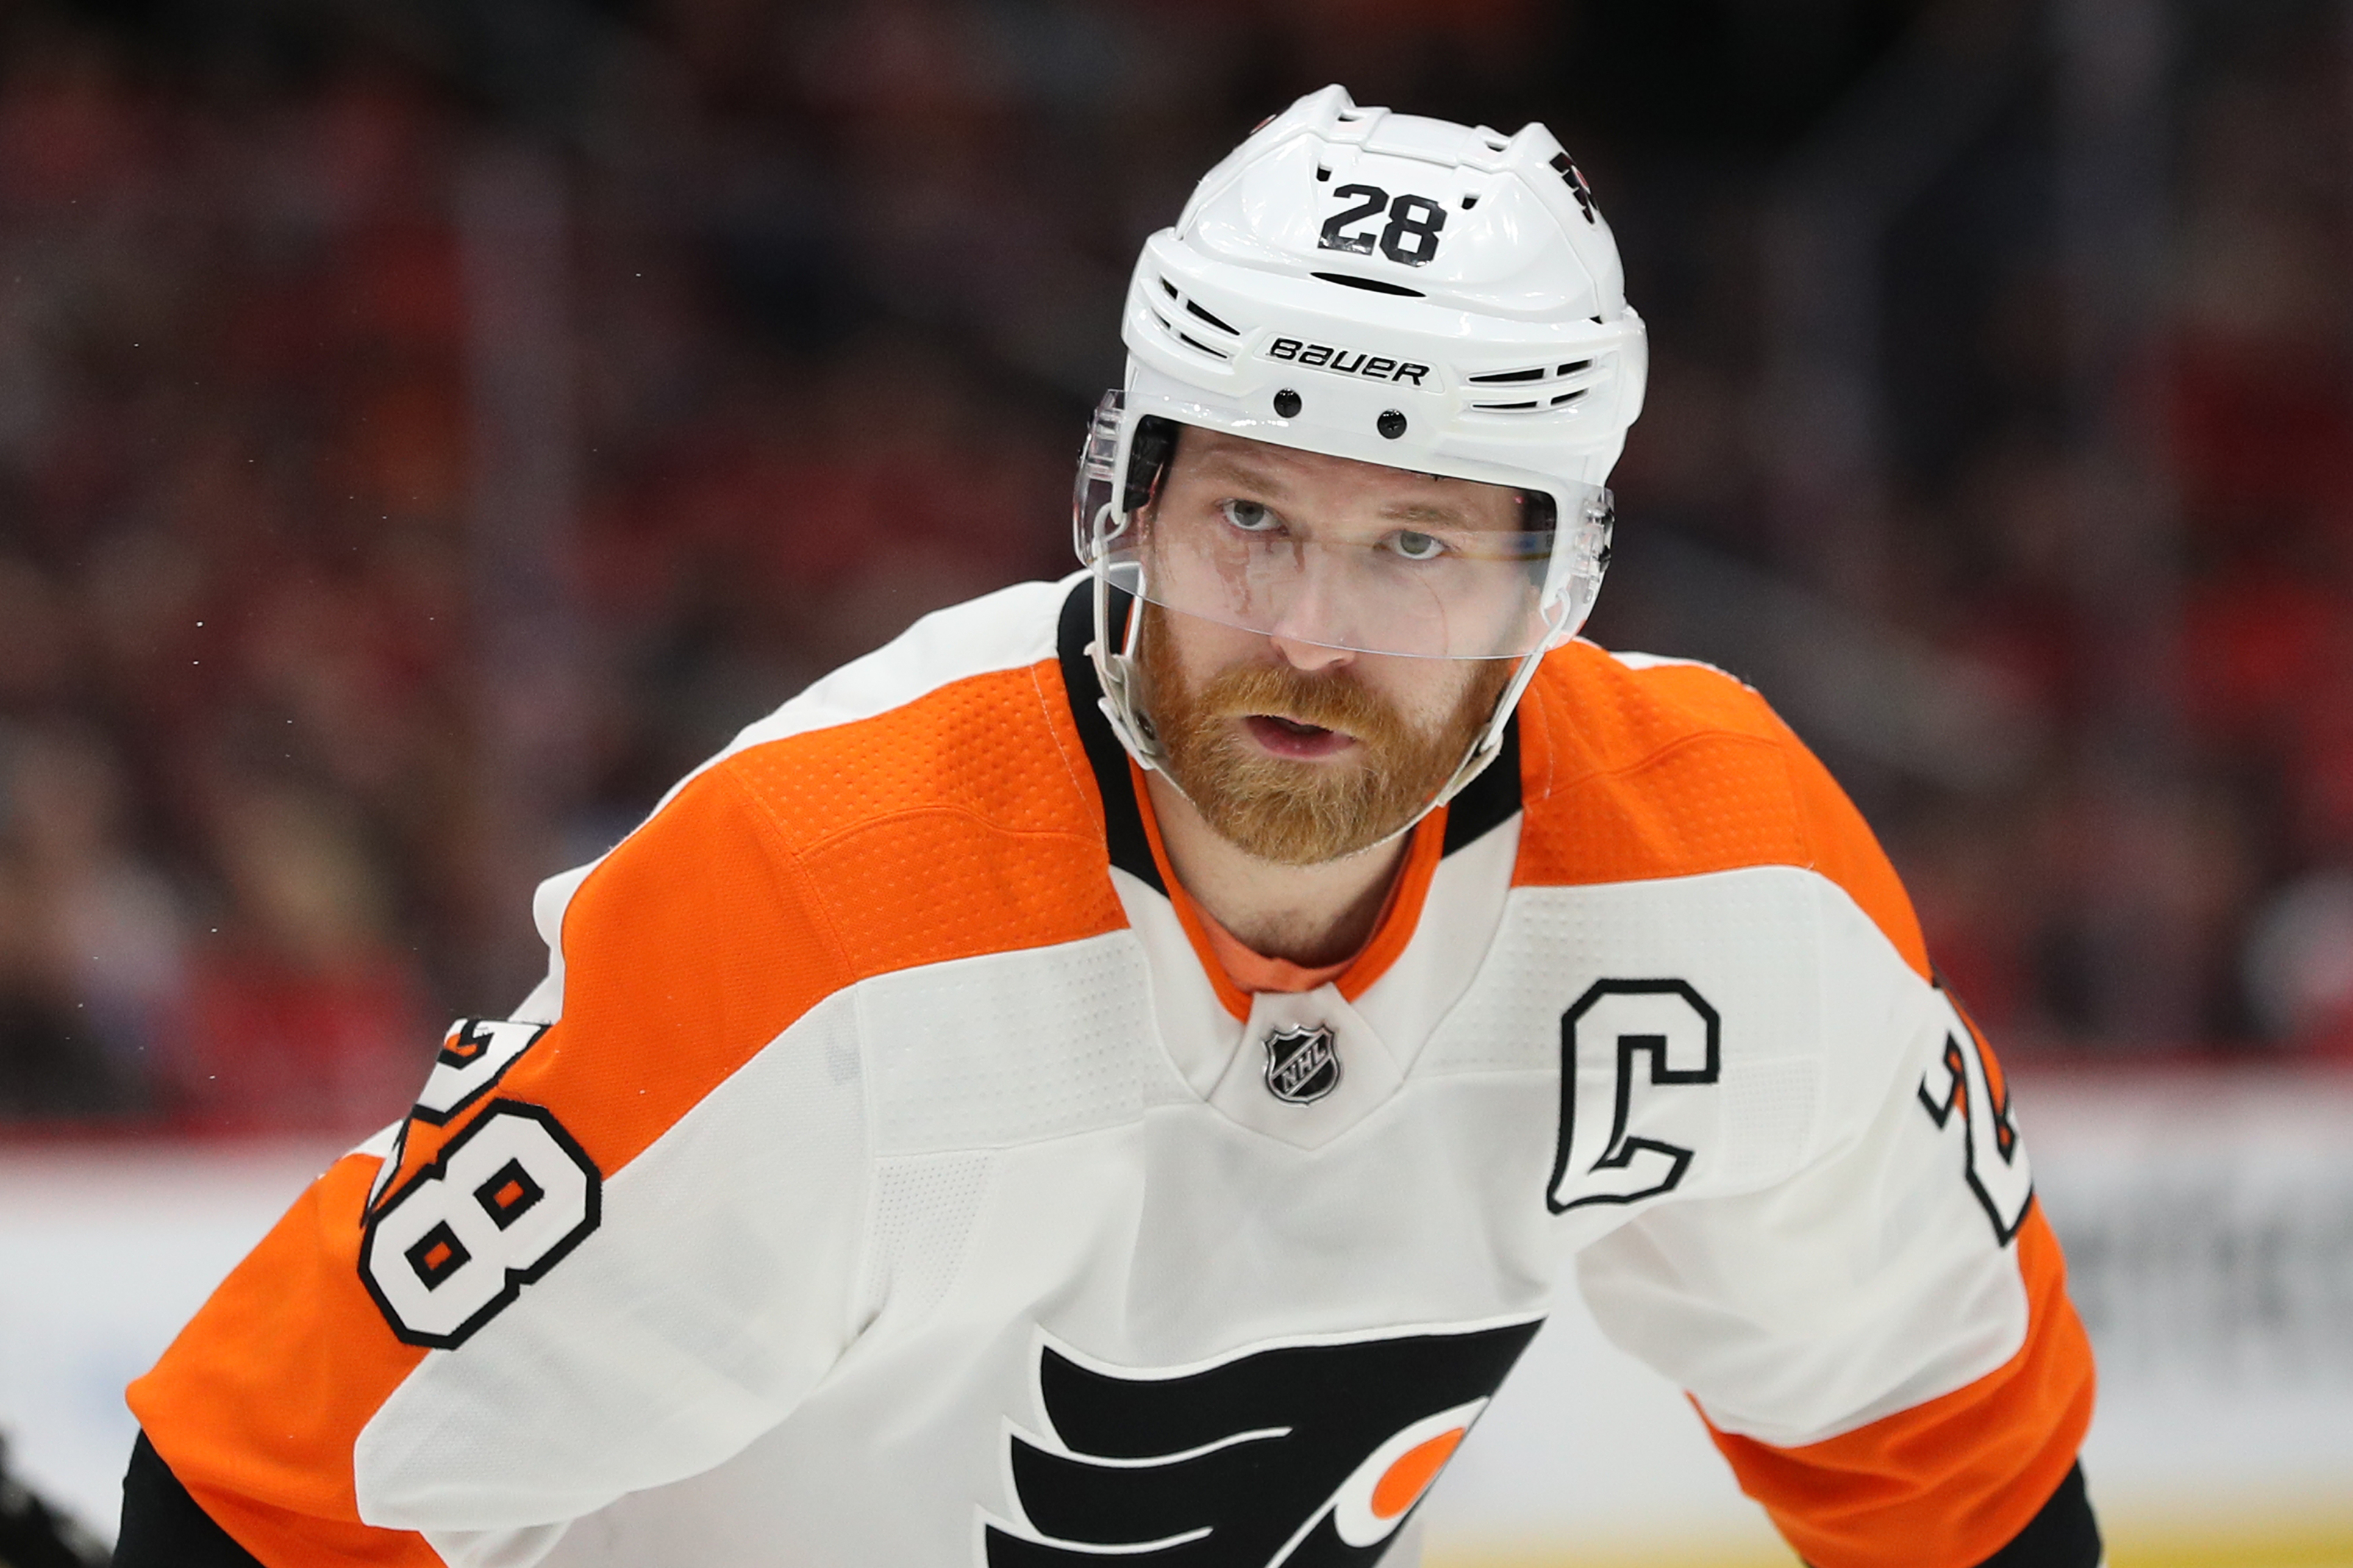 Claude Giroux expected to be Flyers' next captain